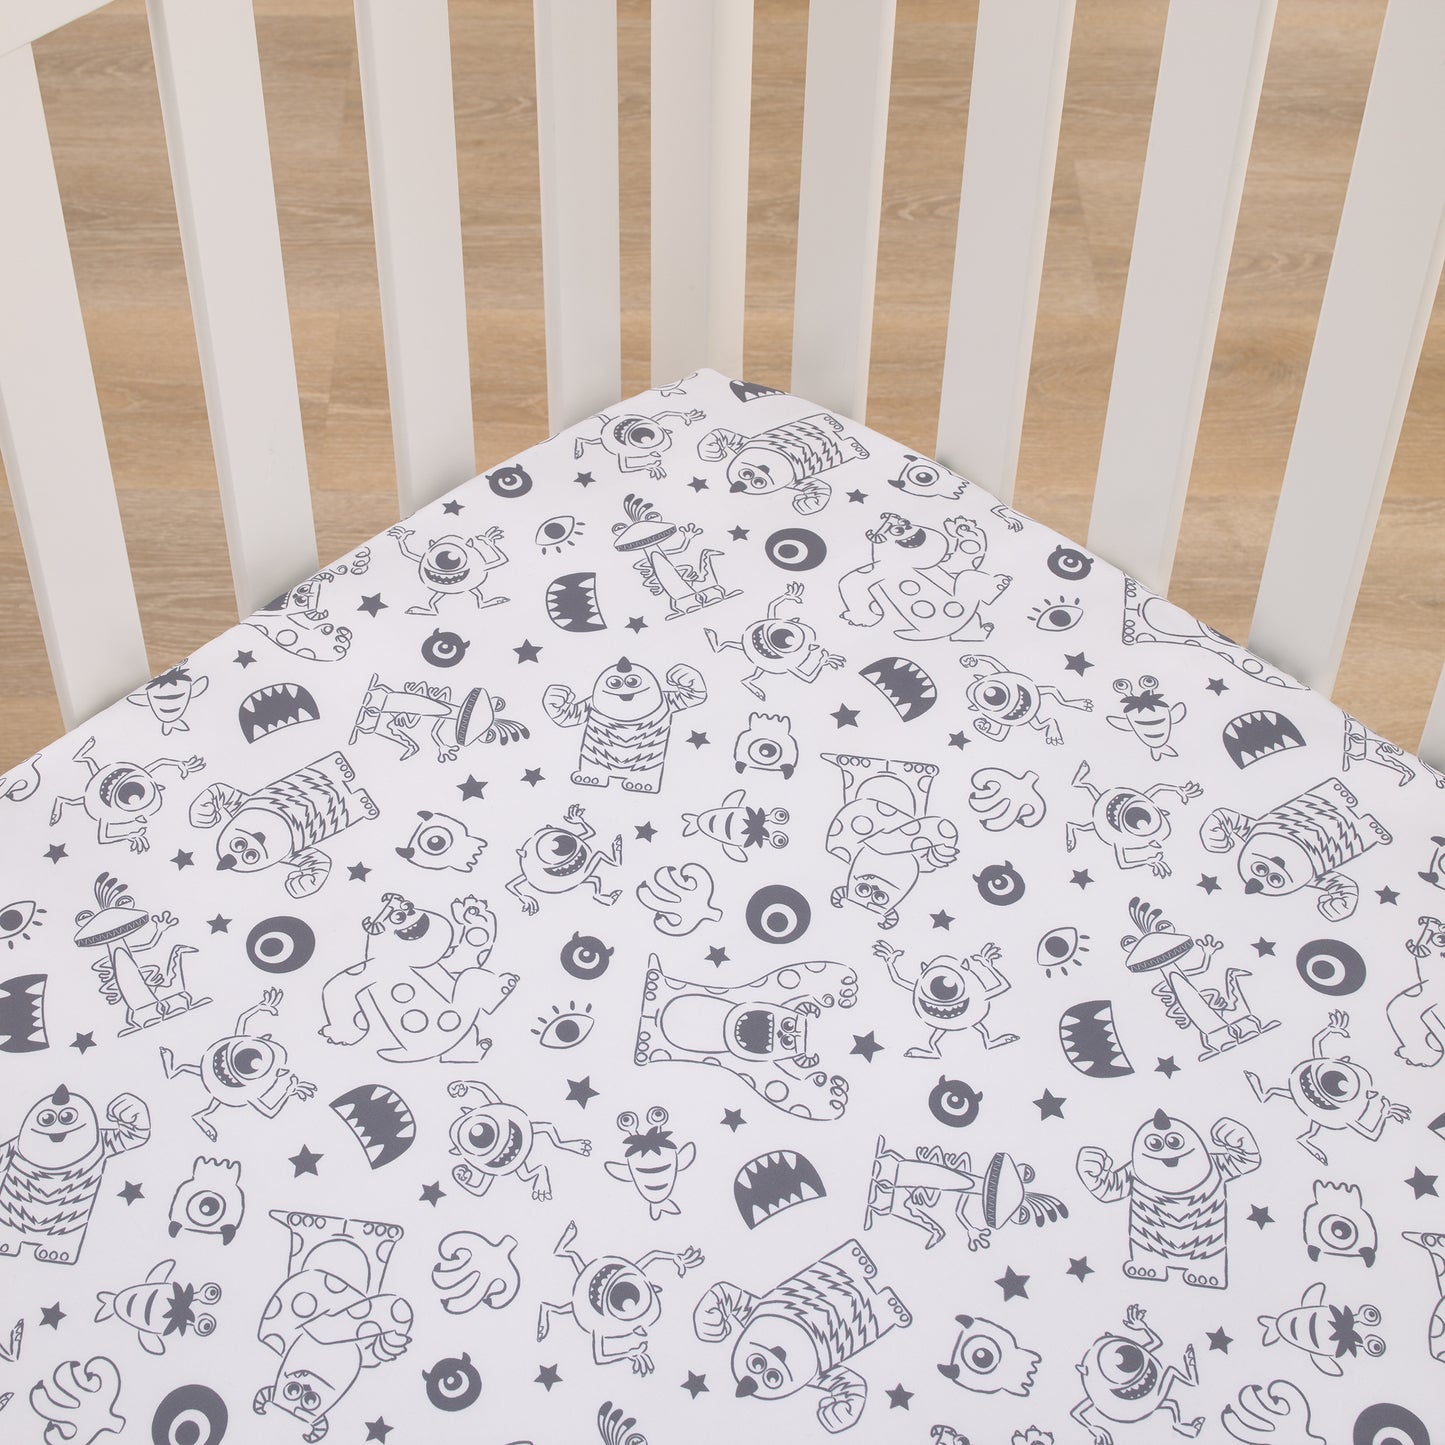 Disney Monsters, Inc. Cutest Little Monster Gray, and White Nursery Fitted Crib Sheet